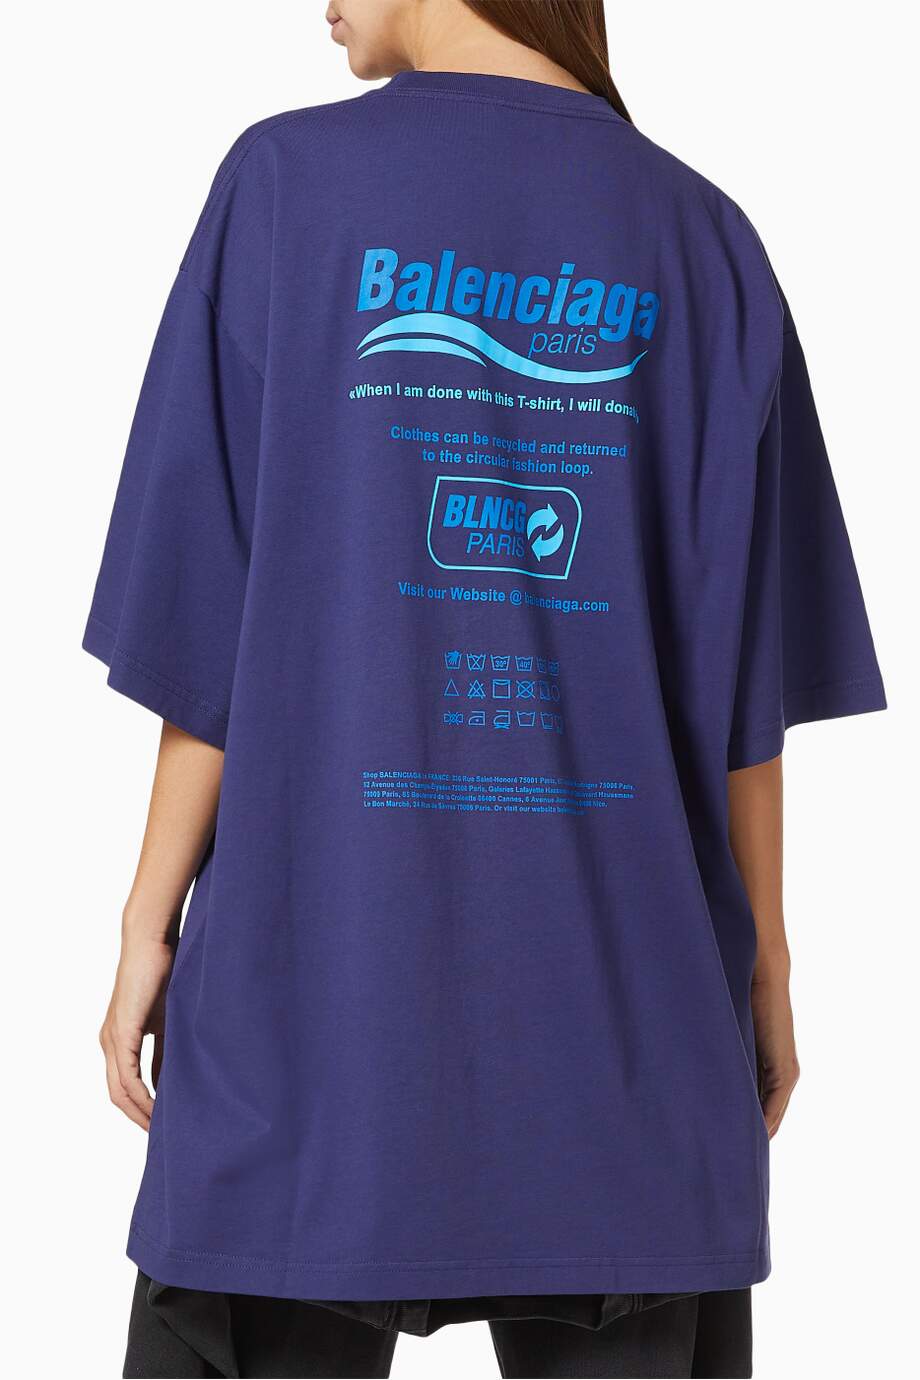 BALENCIAGA  Dry Cleaning Boxy T-shirt in Vintage Jersey